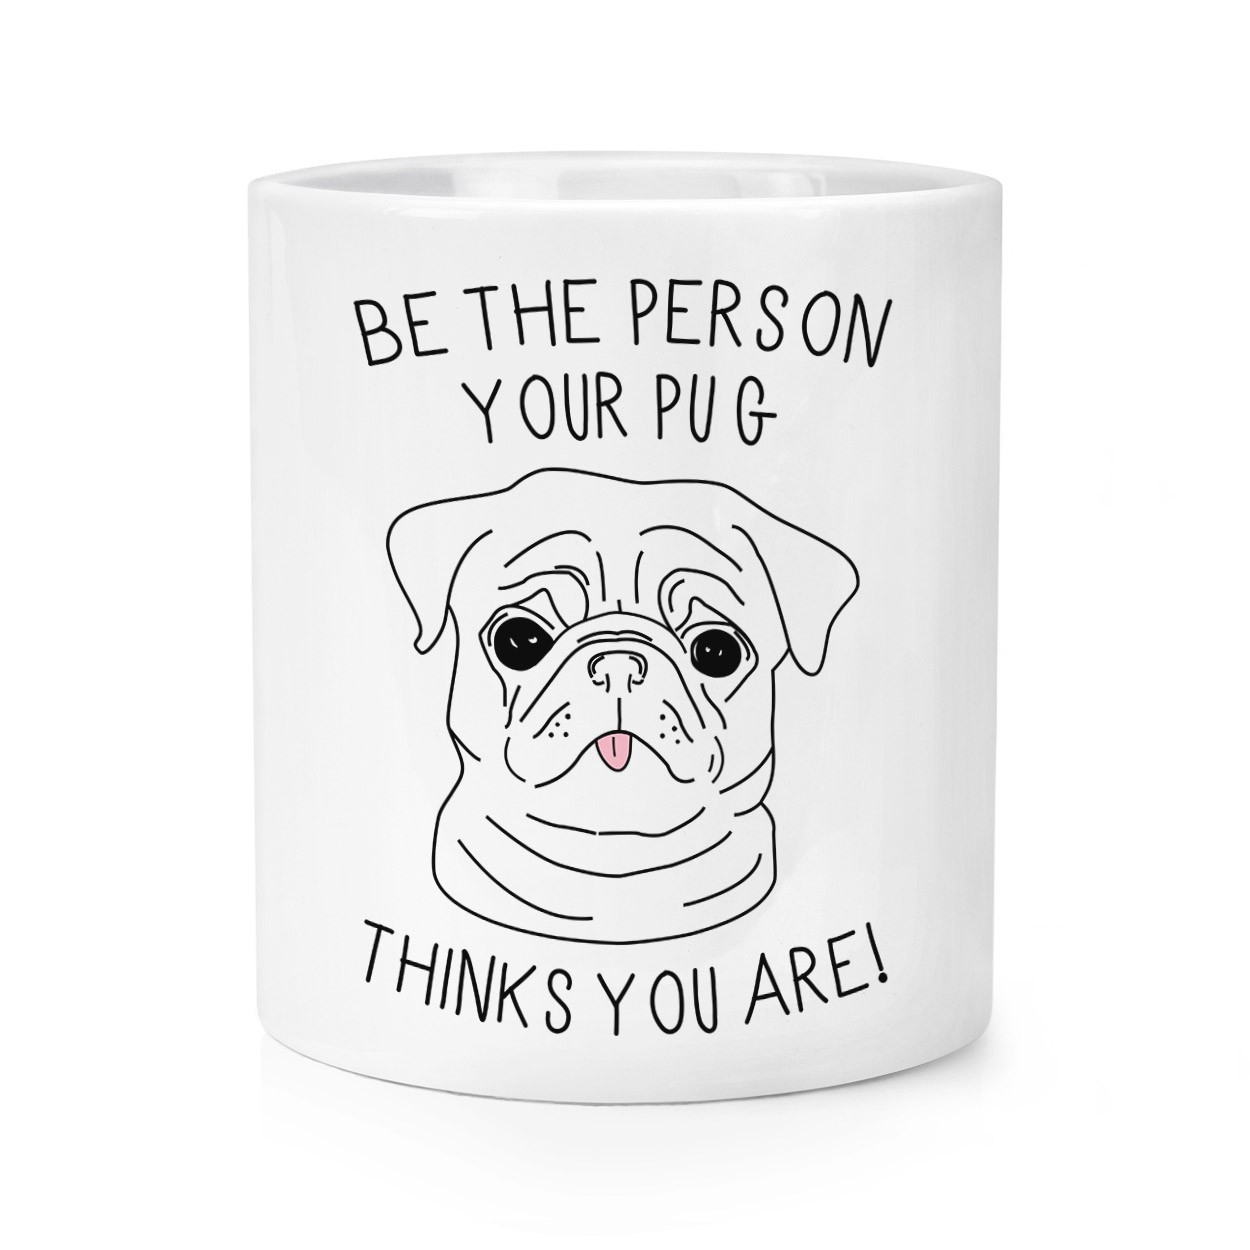 Be The Person Your Pug Thinks You Are Makeup Brush Pencil Pot